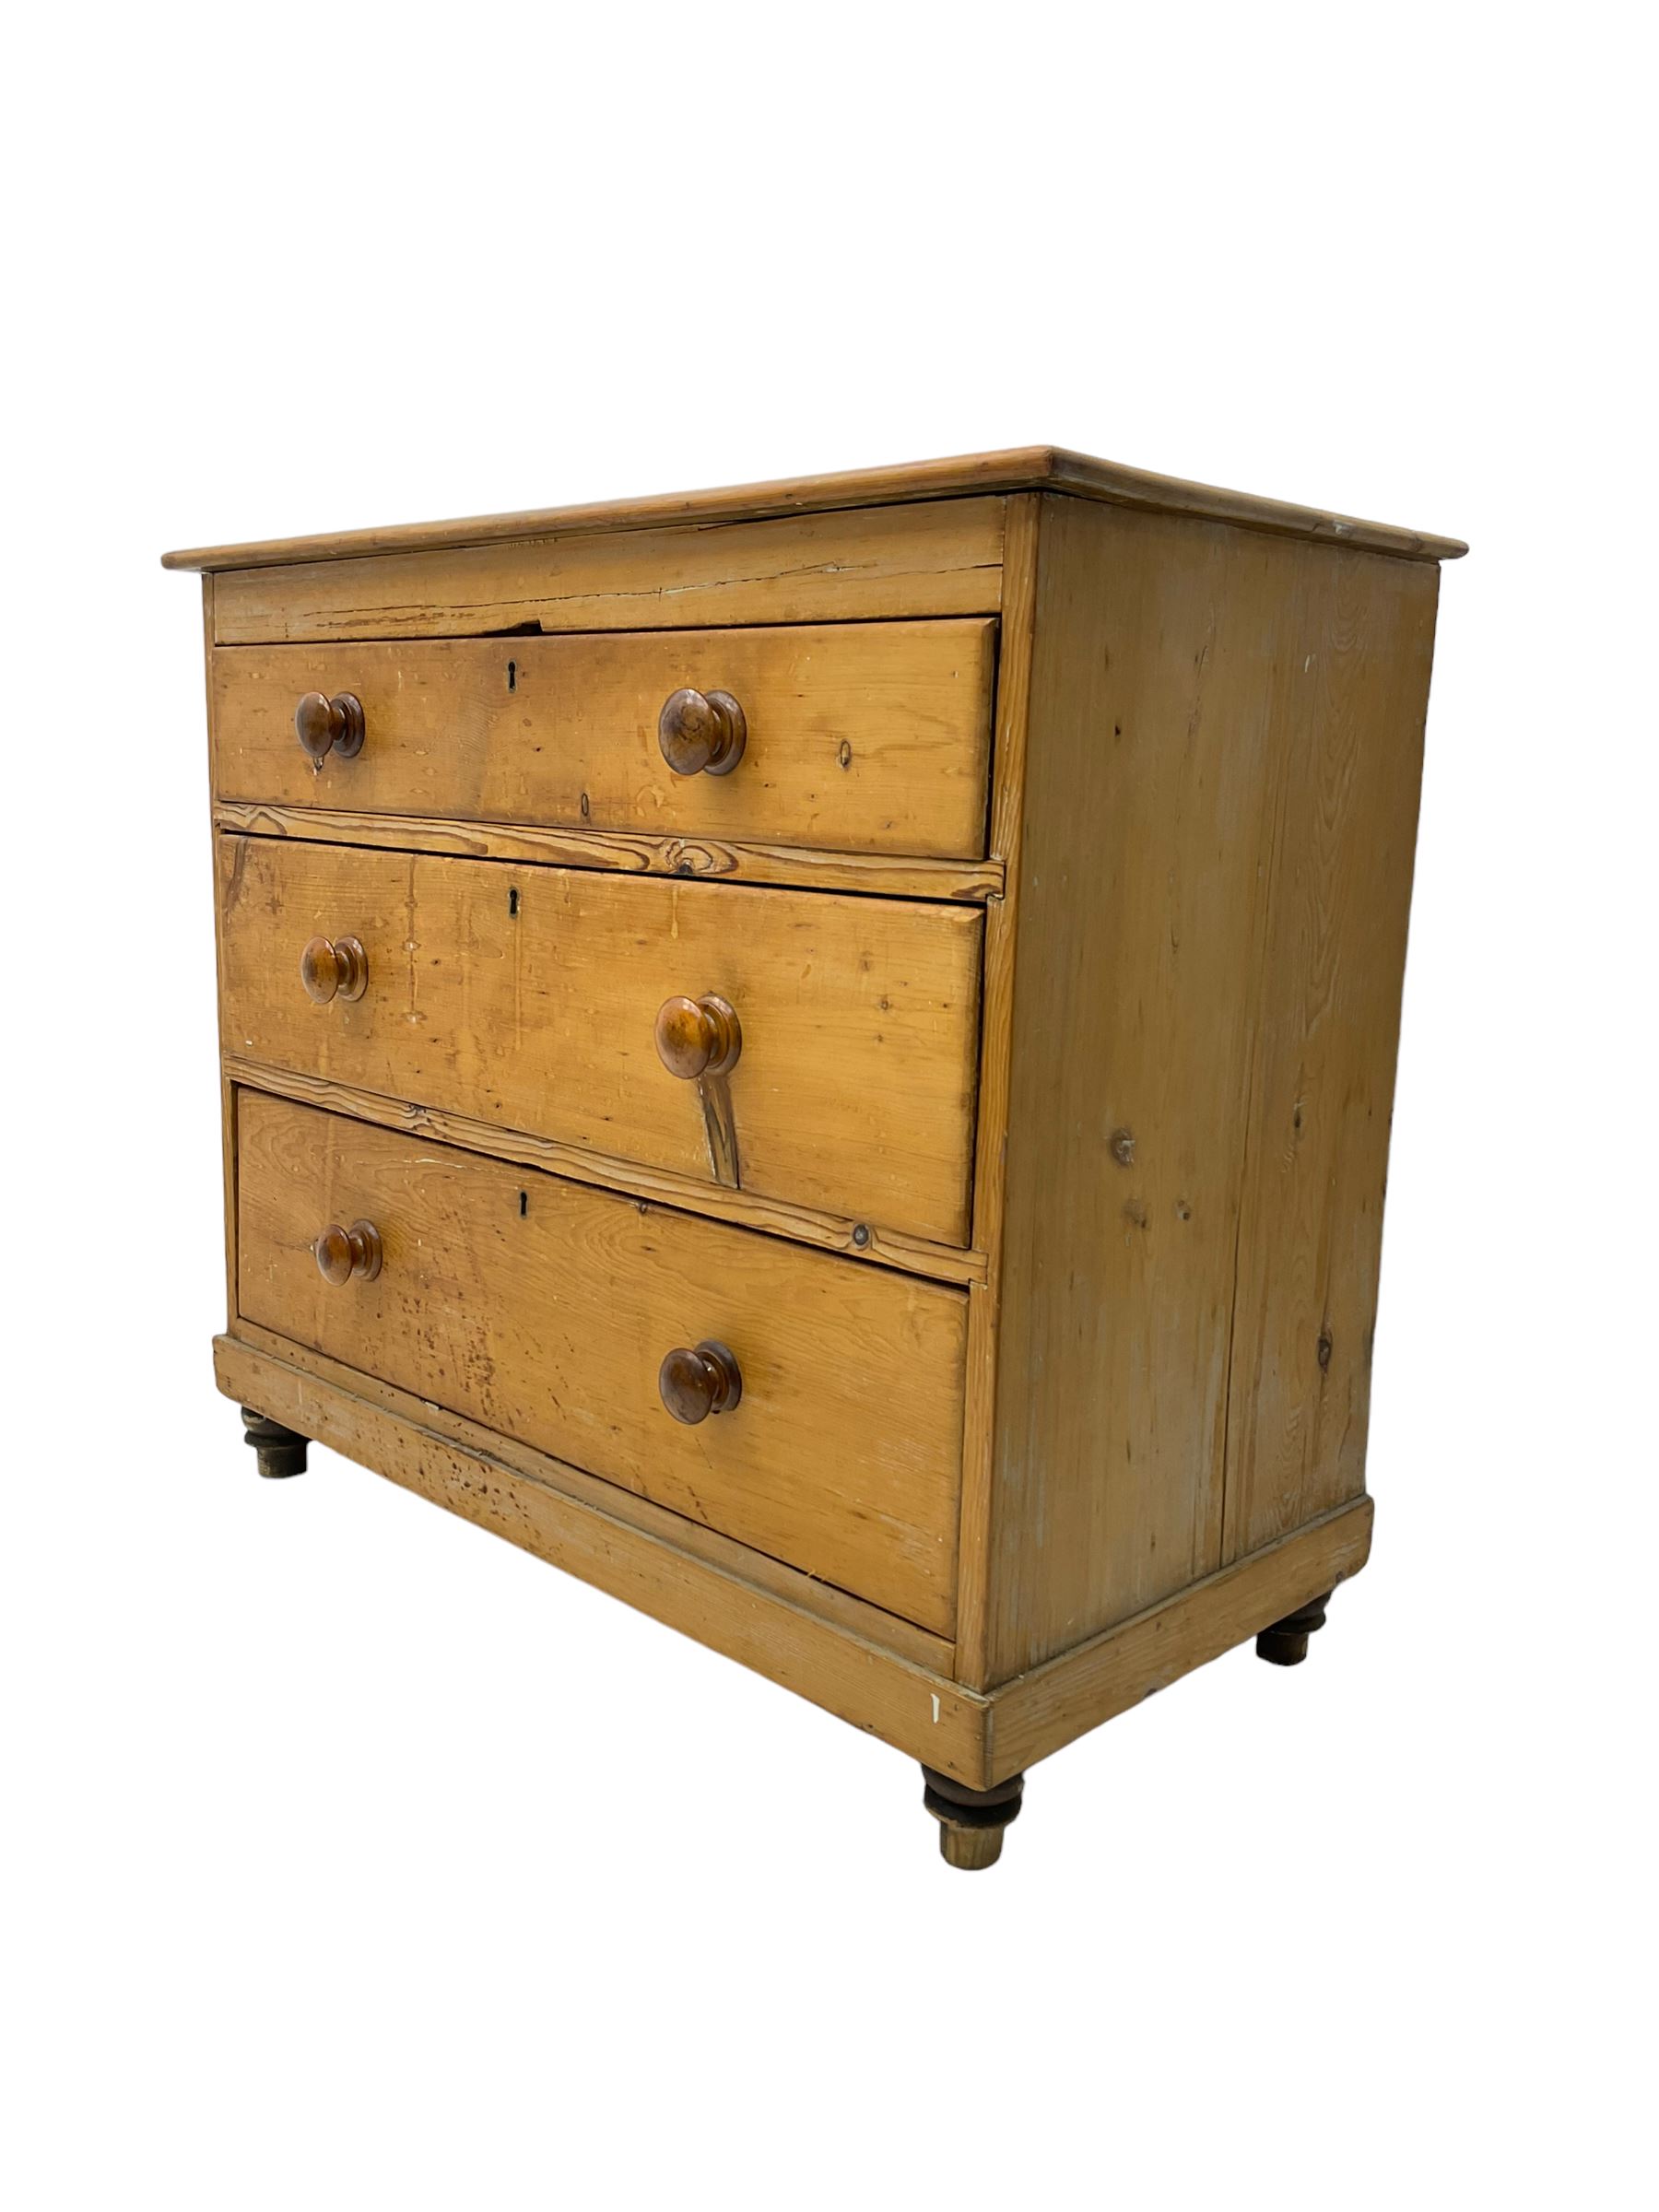 Victorian waxed pine chest - Image 6 of 7